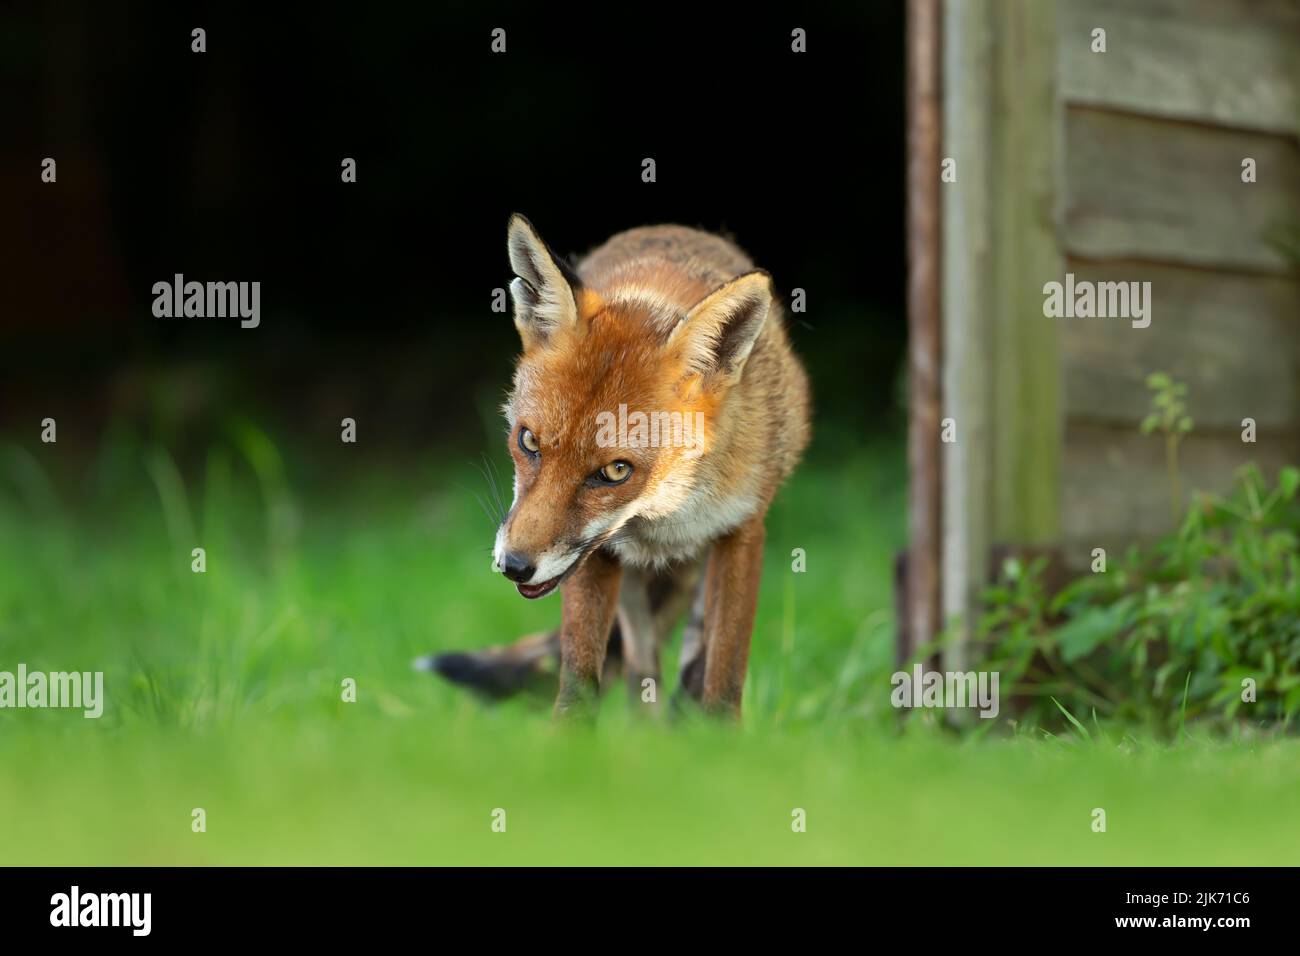 Close up of a Red fox (Vulpes vulpes) in grass against dark background, England, UK. Stock Photo